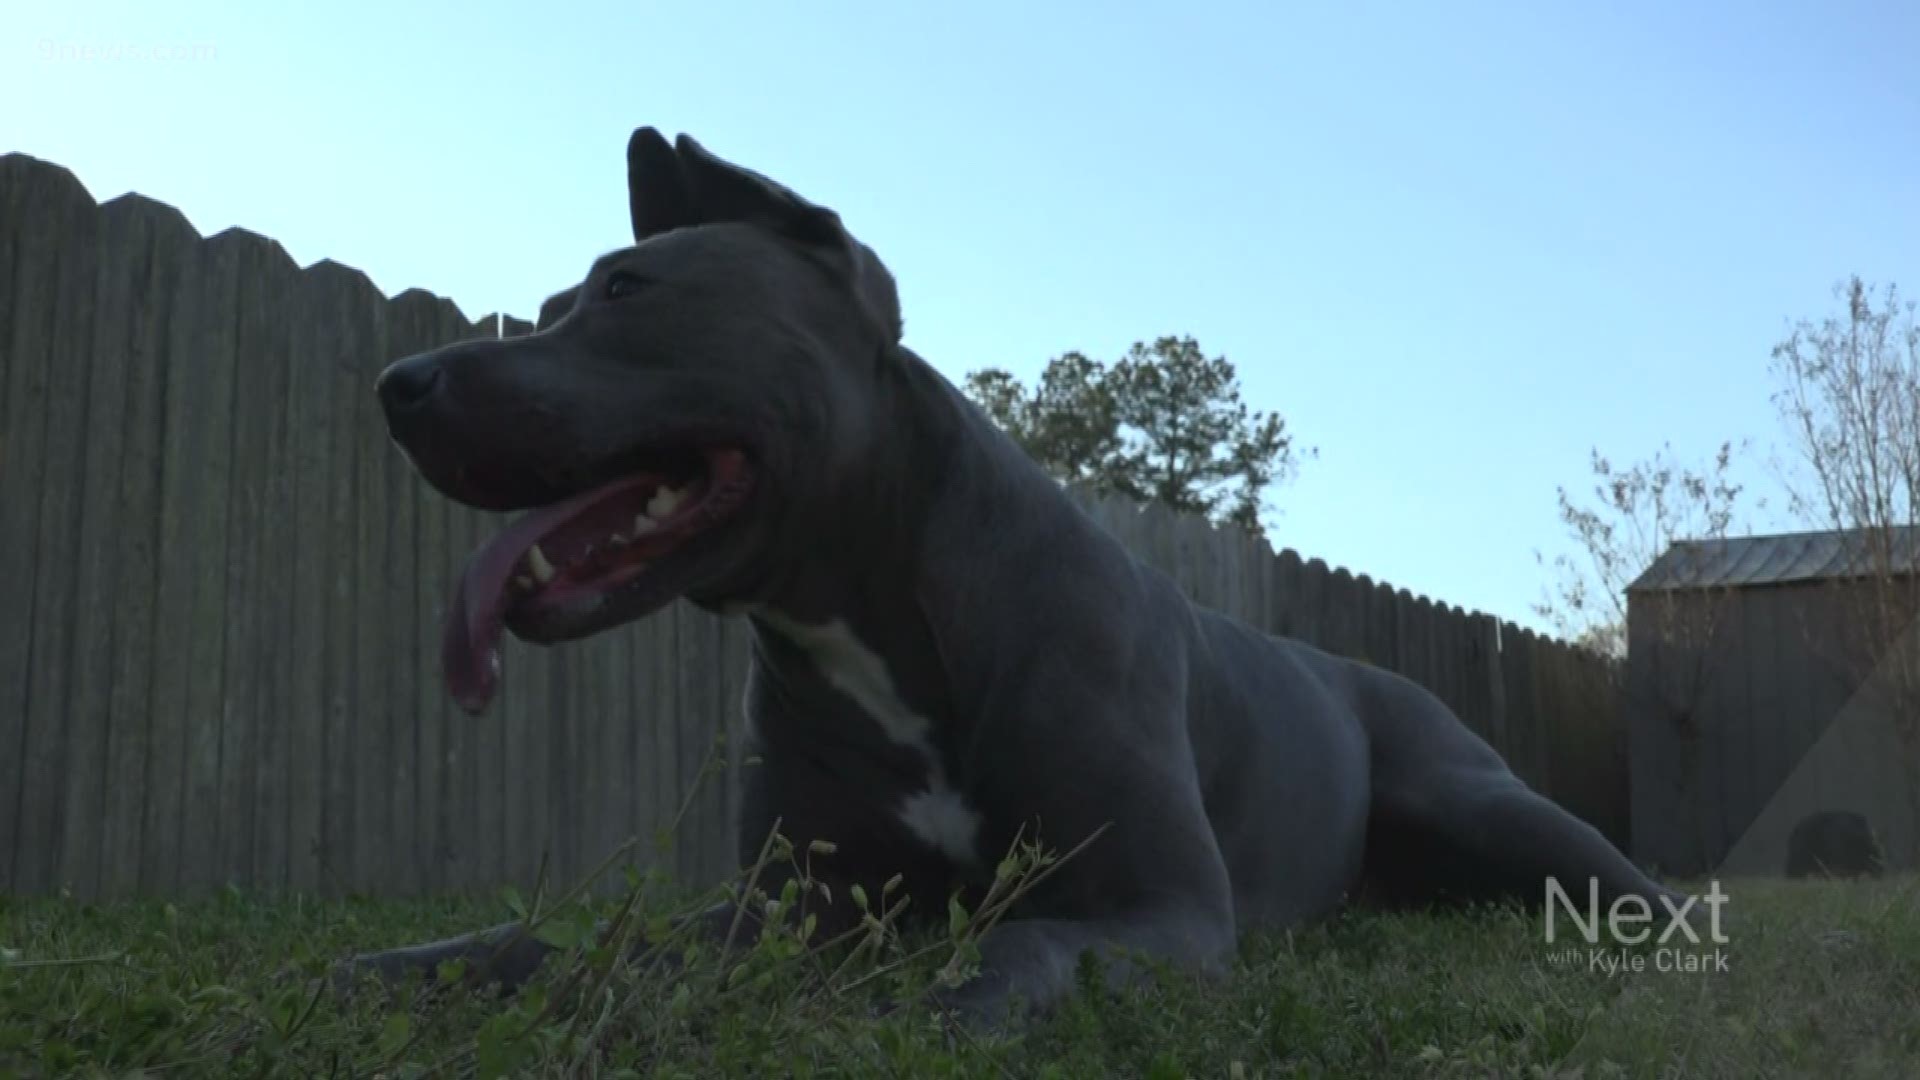 Denver banned pit bulls in 1989 amid concerns the dogs were disproportionately aggressive and violent.